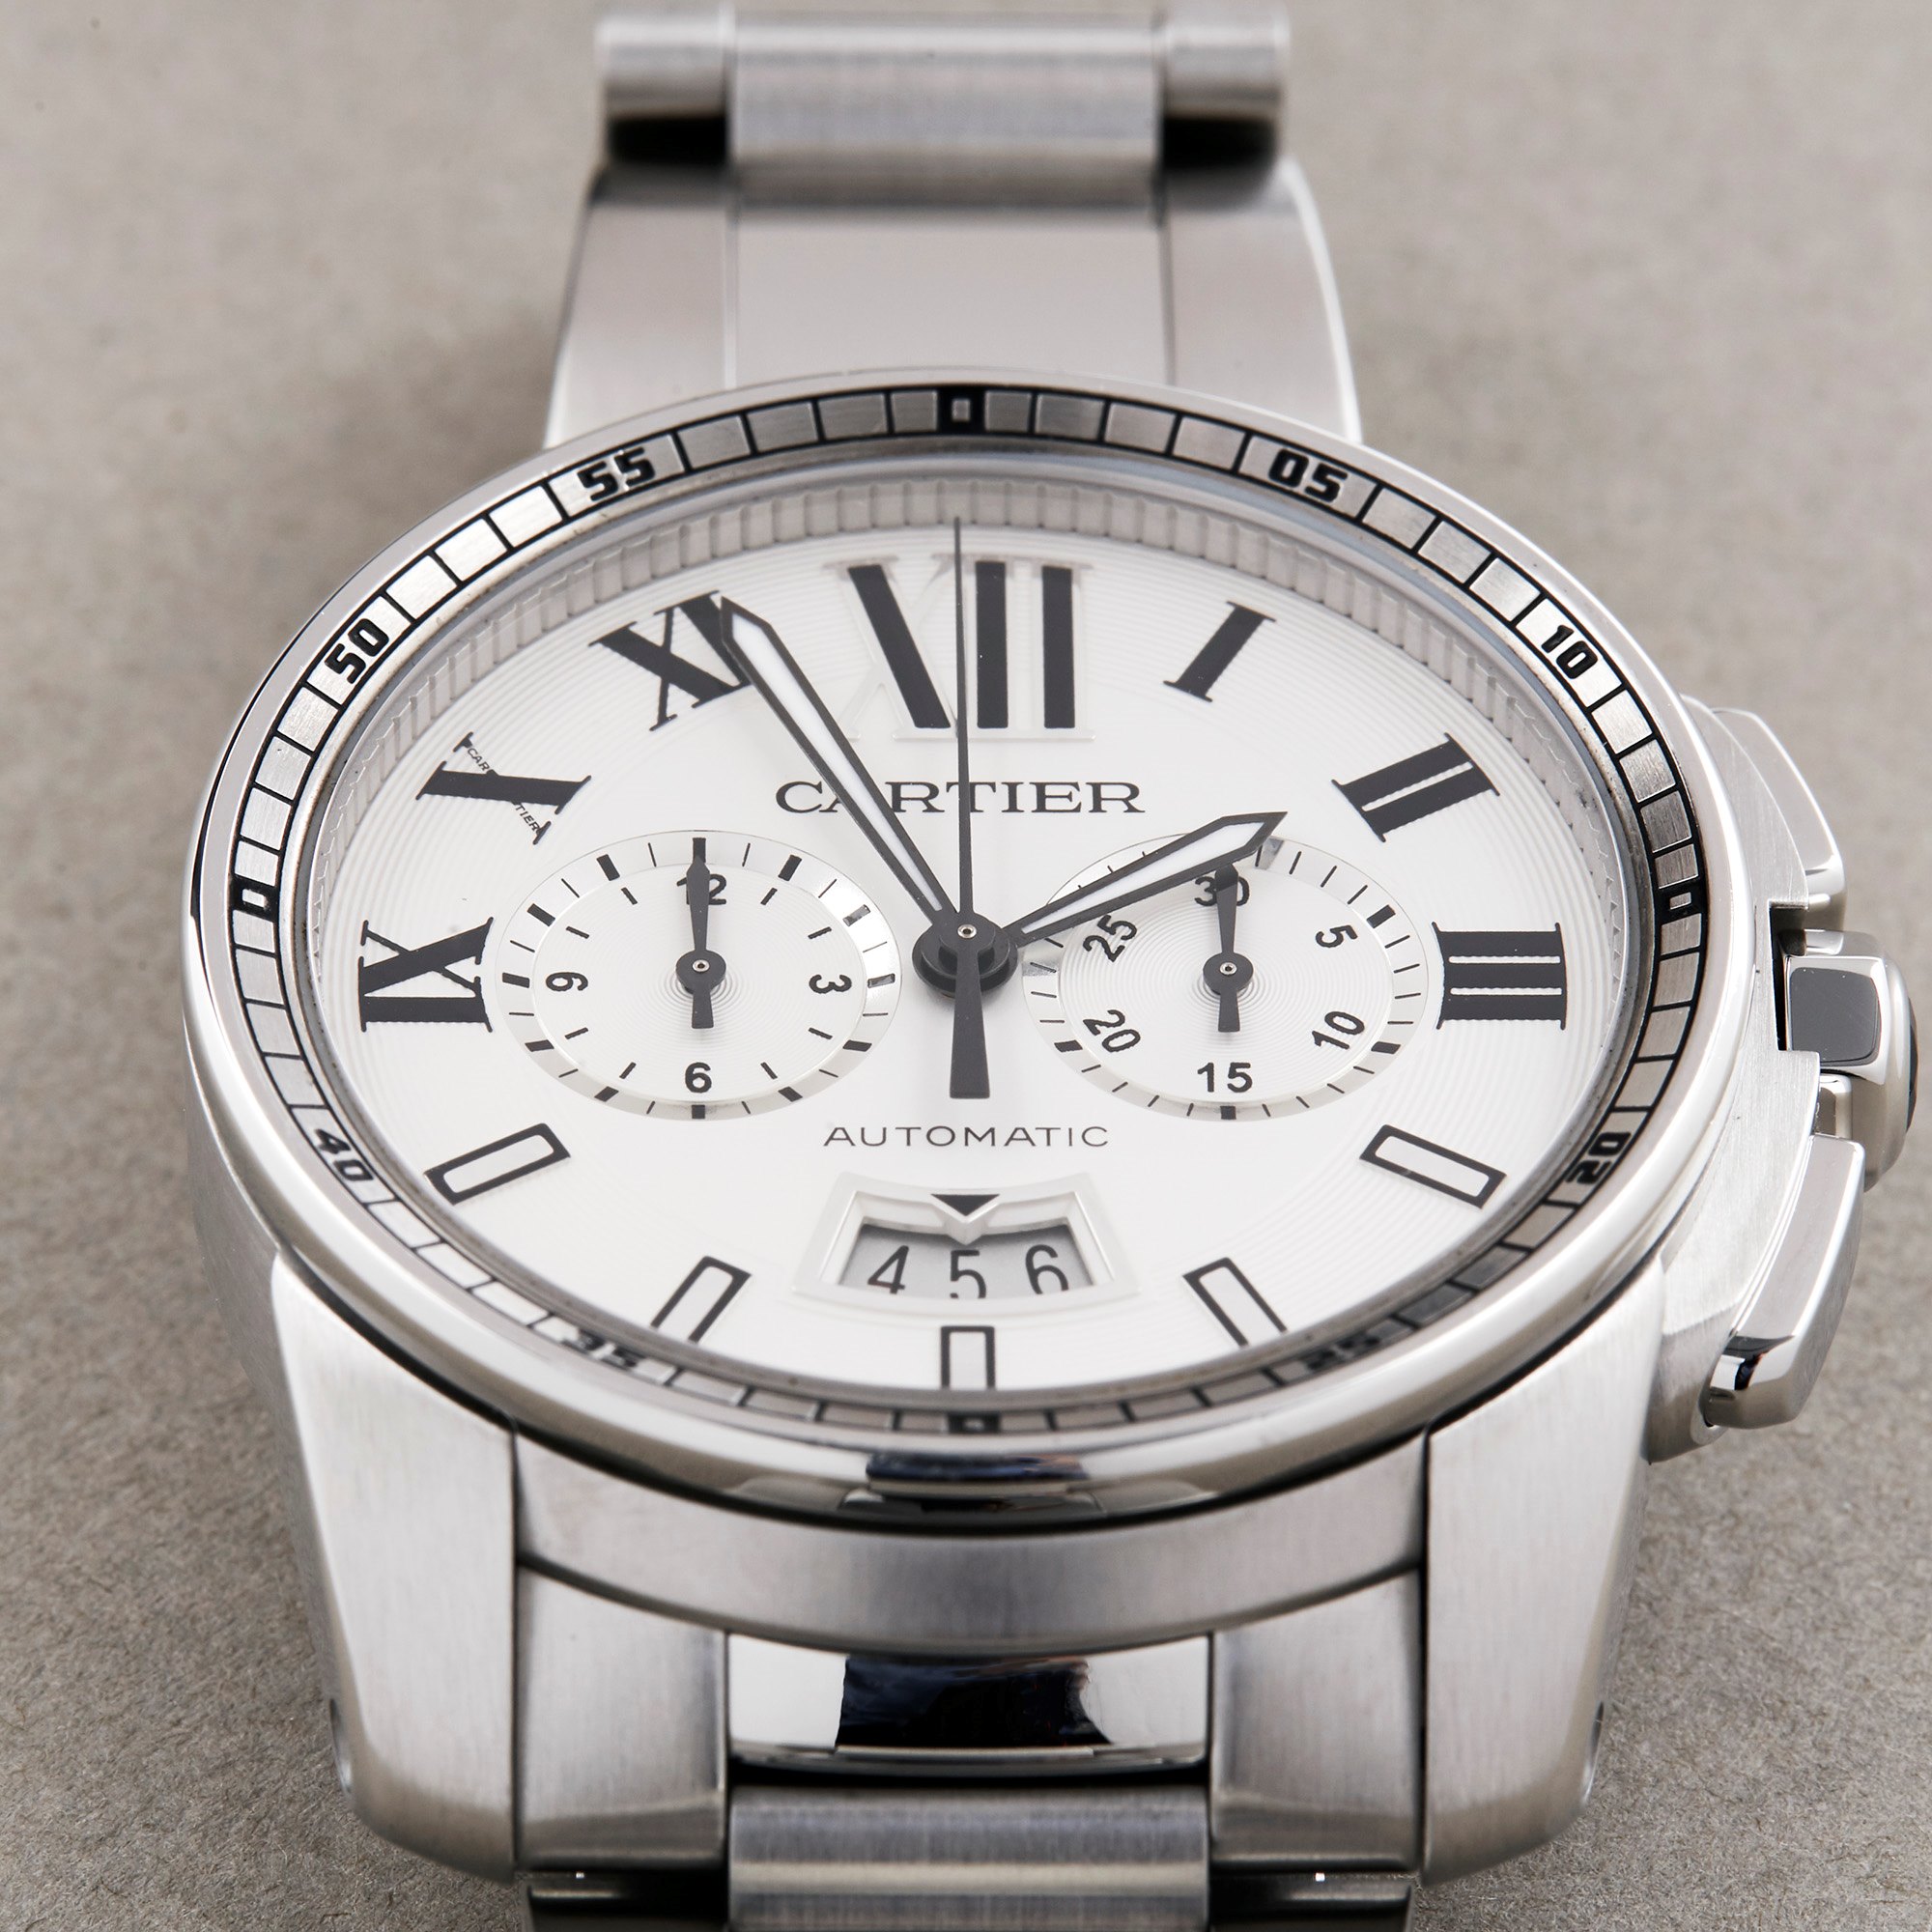 Cartier Calibre de Cartier Chronograph Stainless Steel Watch W7100045 or 3578 - Image 4 of 10